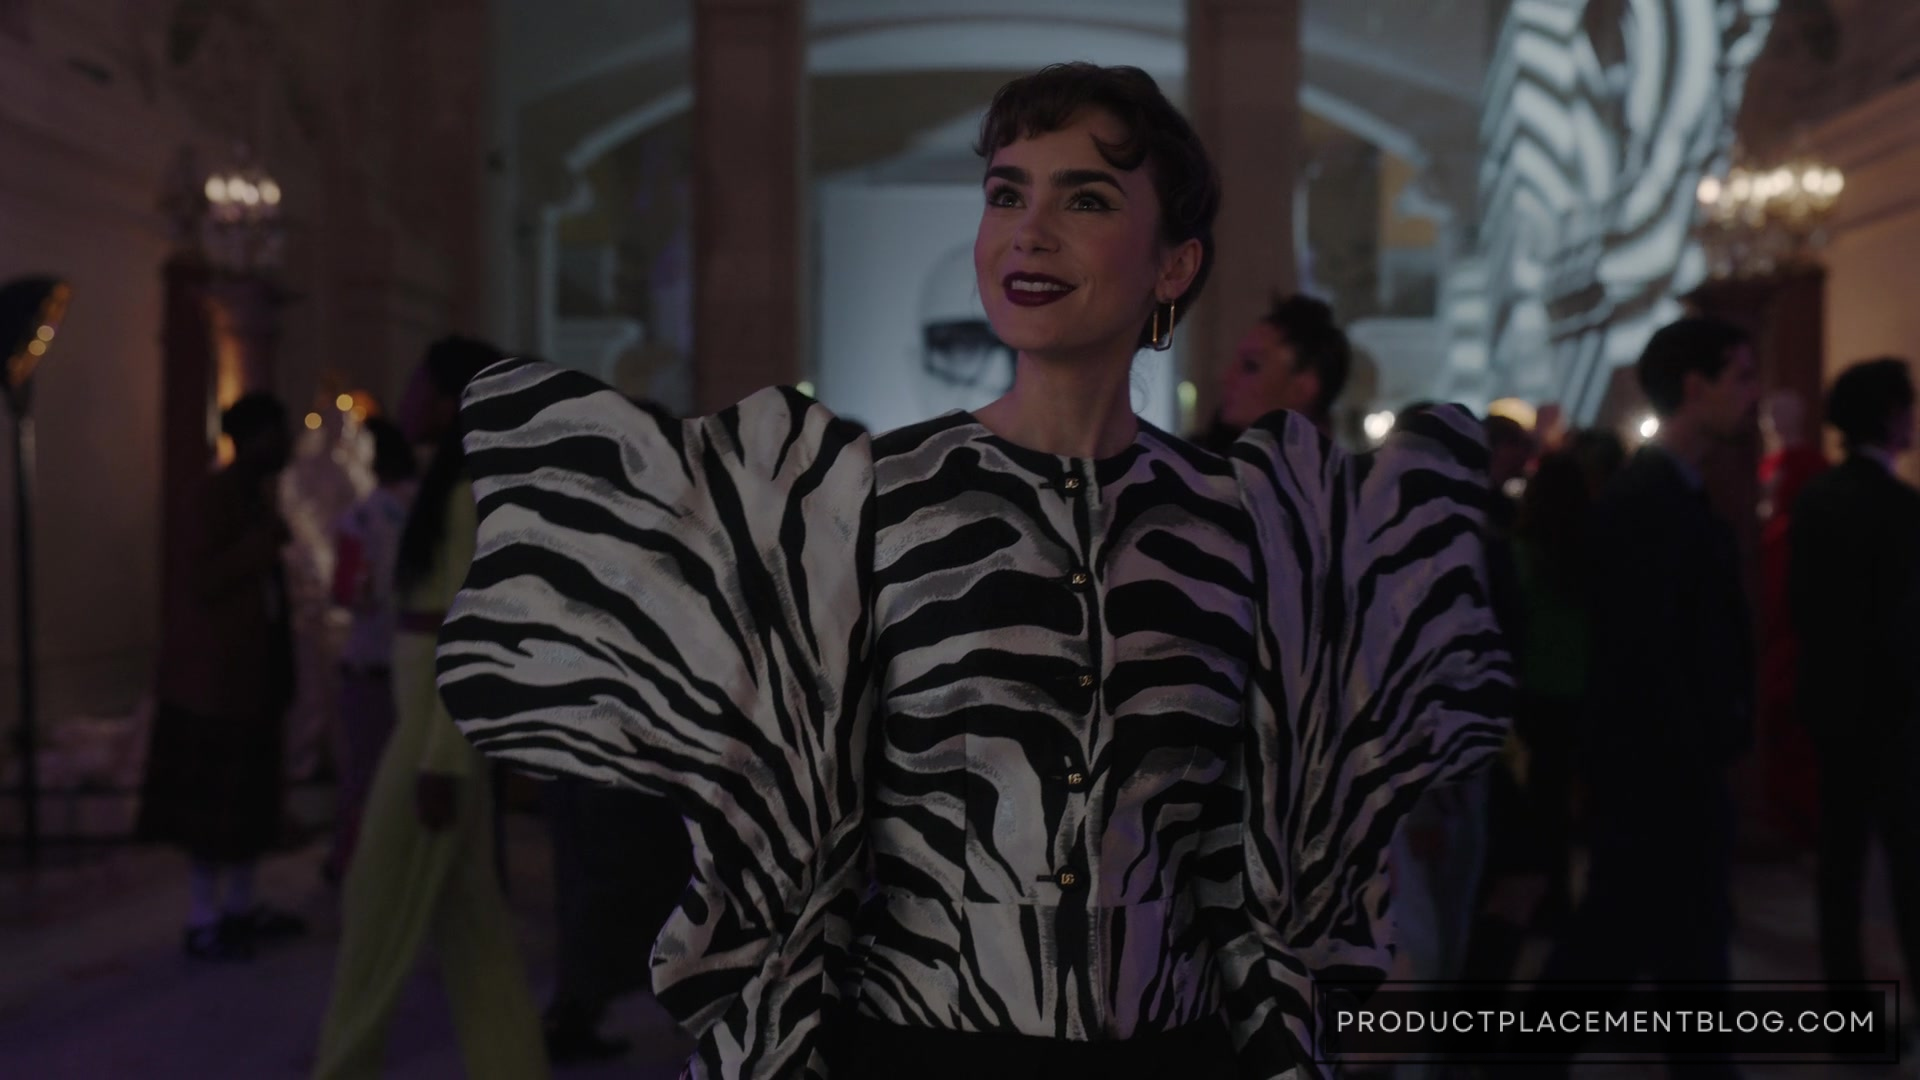 Dolce & Gabbana Zebra Print Shirt Worn By Lily Collins As Emily Cooper In  Emily In Paris S03E02 